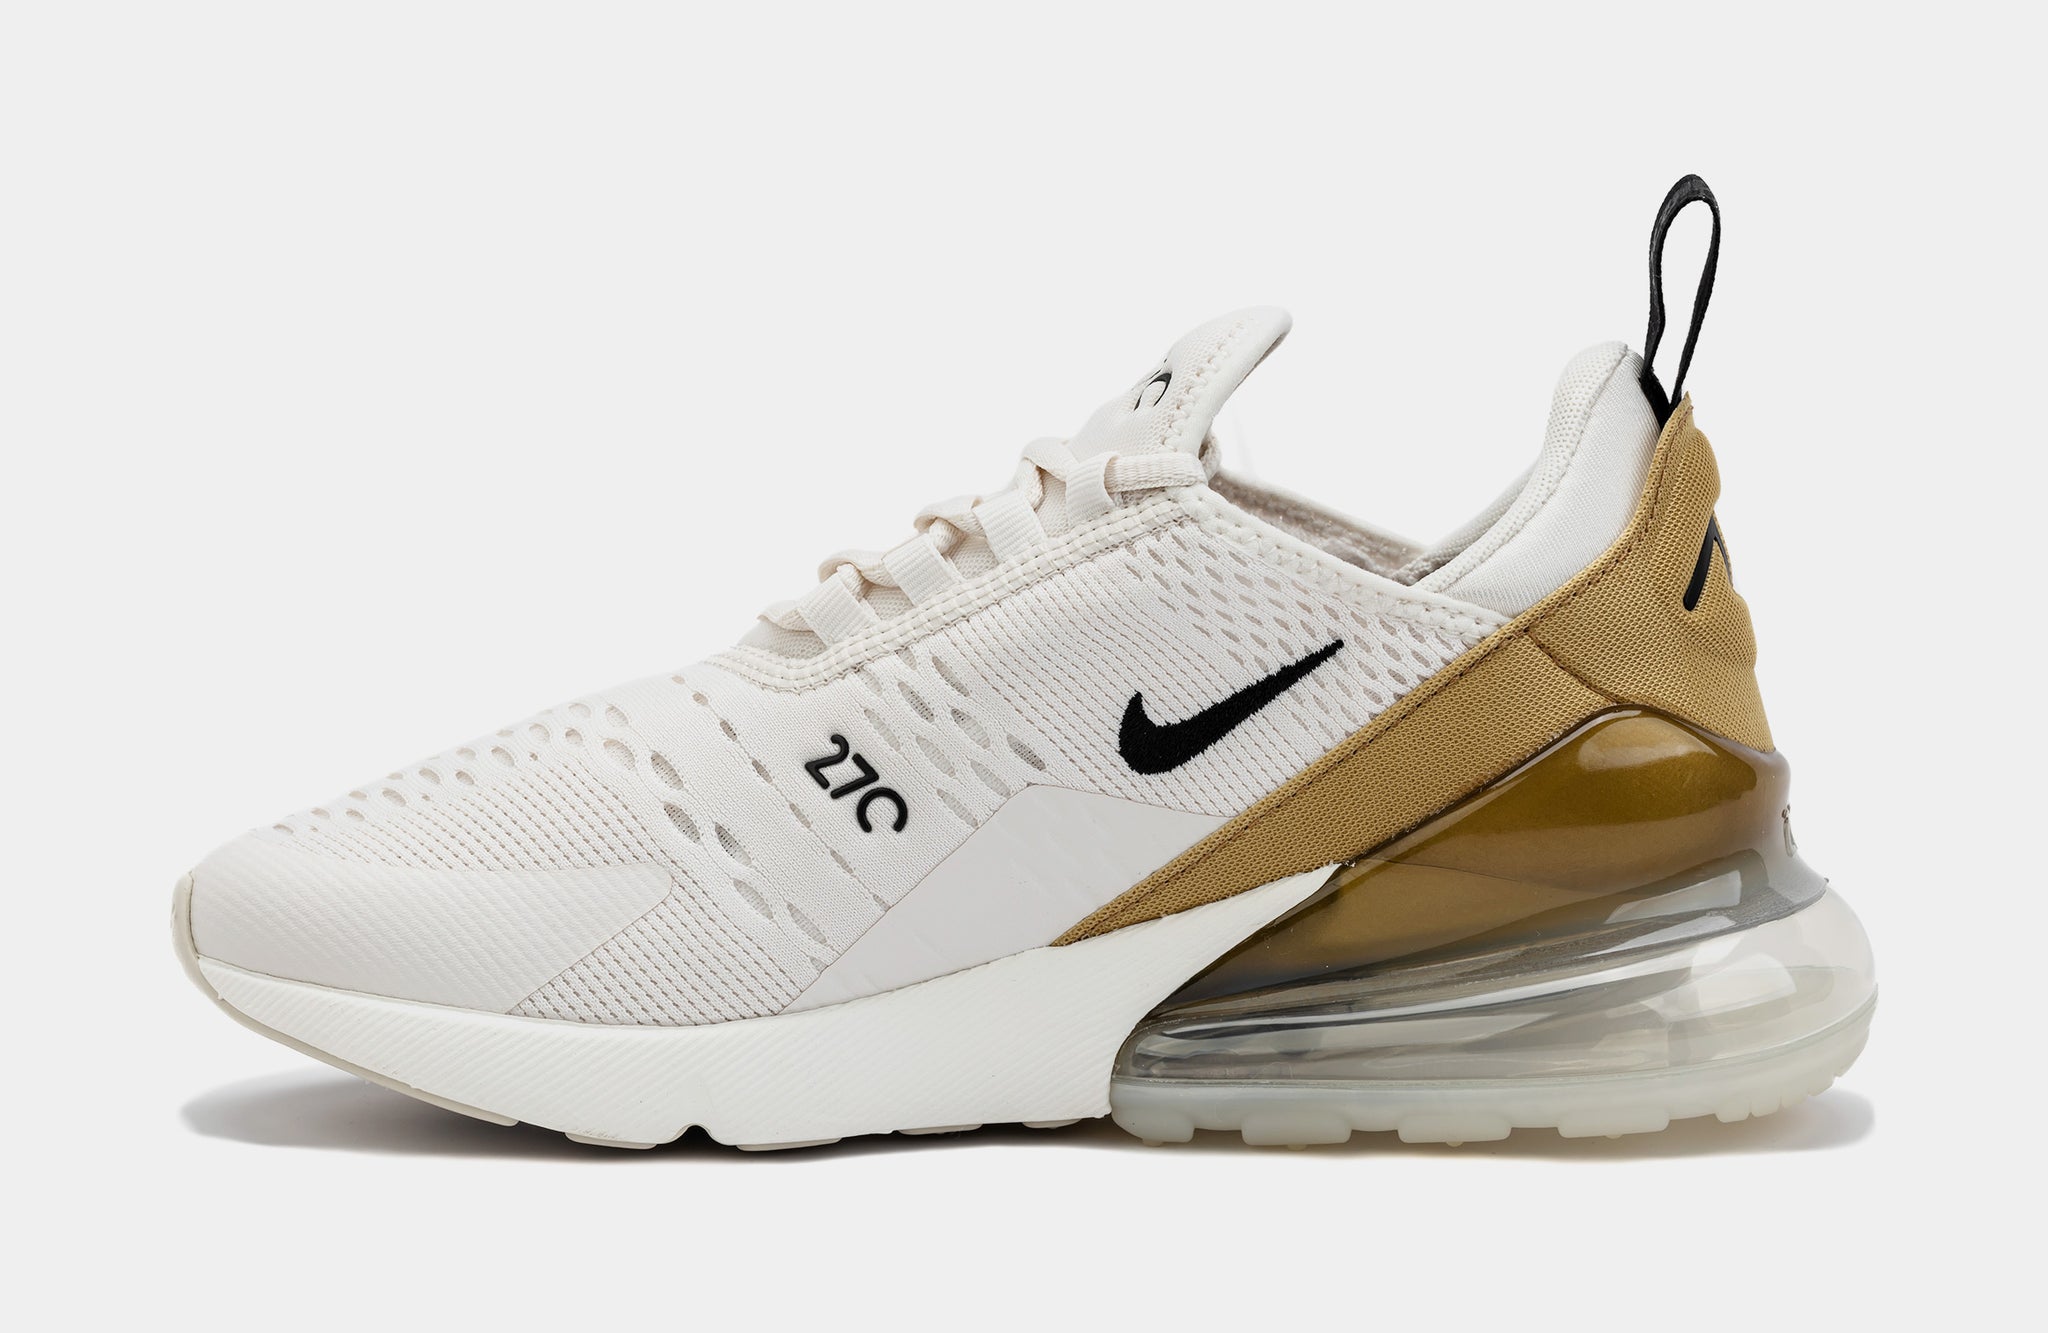 Nike Air Max 270 Womens Running Shoes Beige Gold DZ7736-001 – Shoe Palace